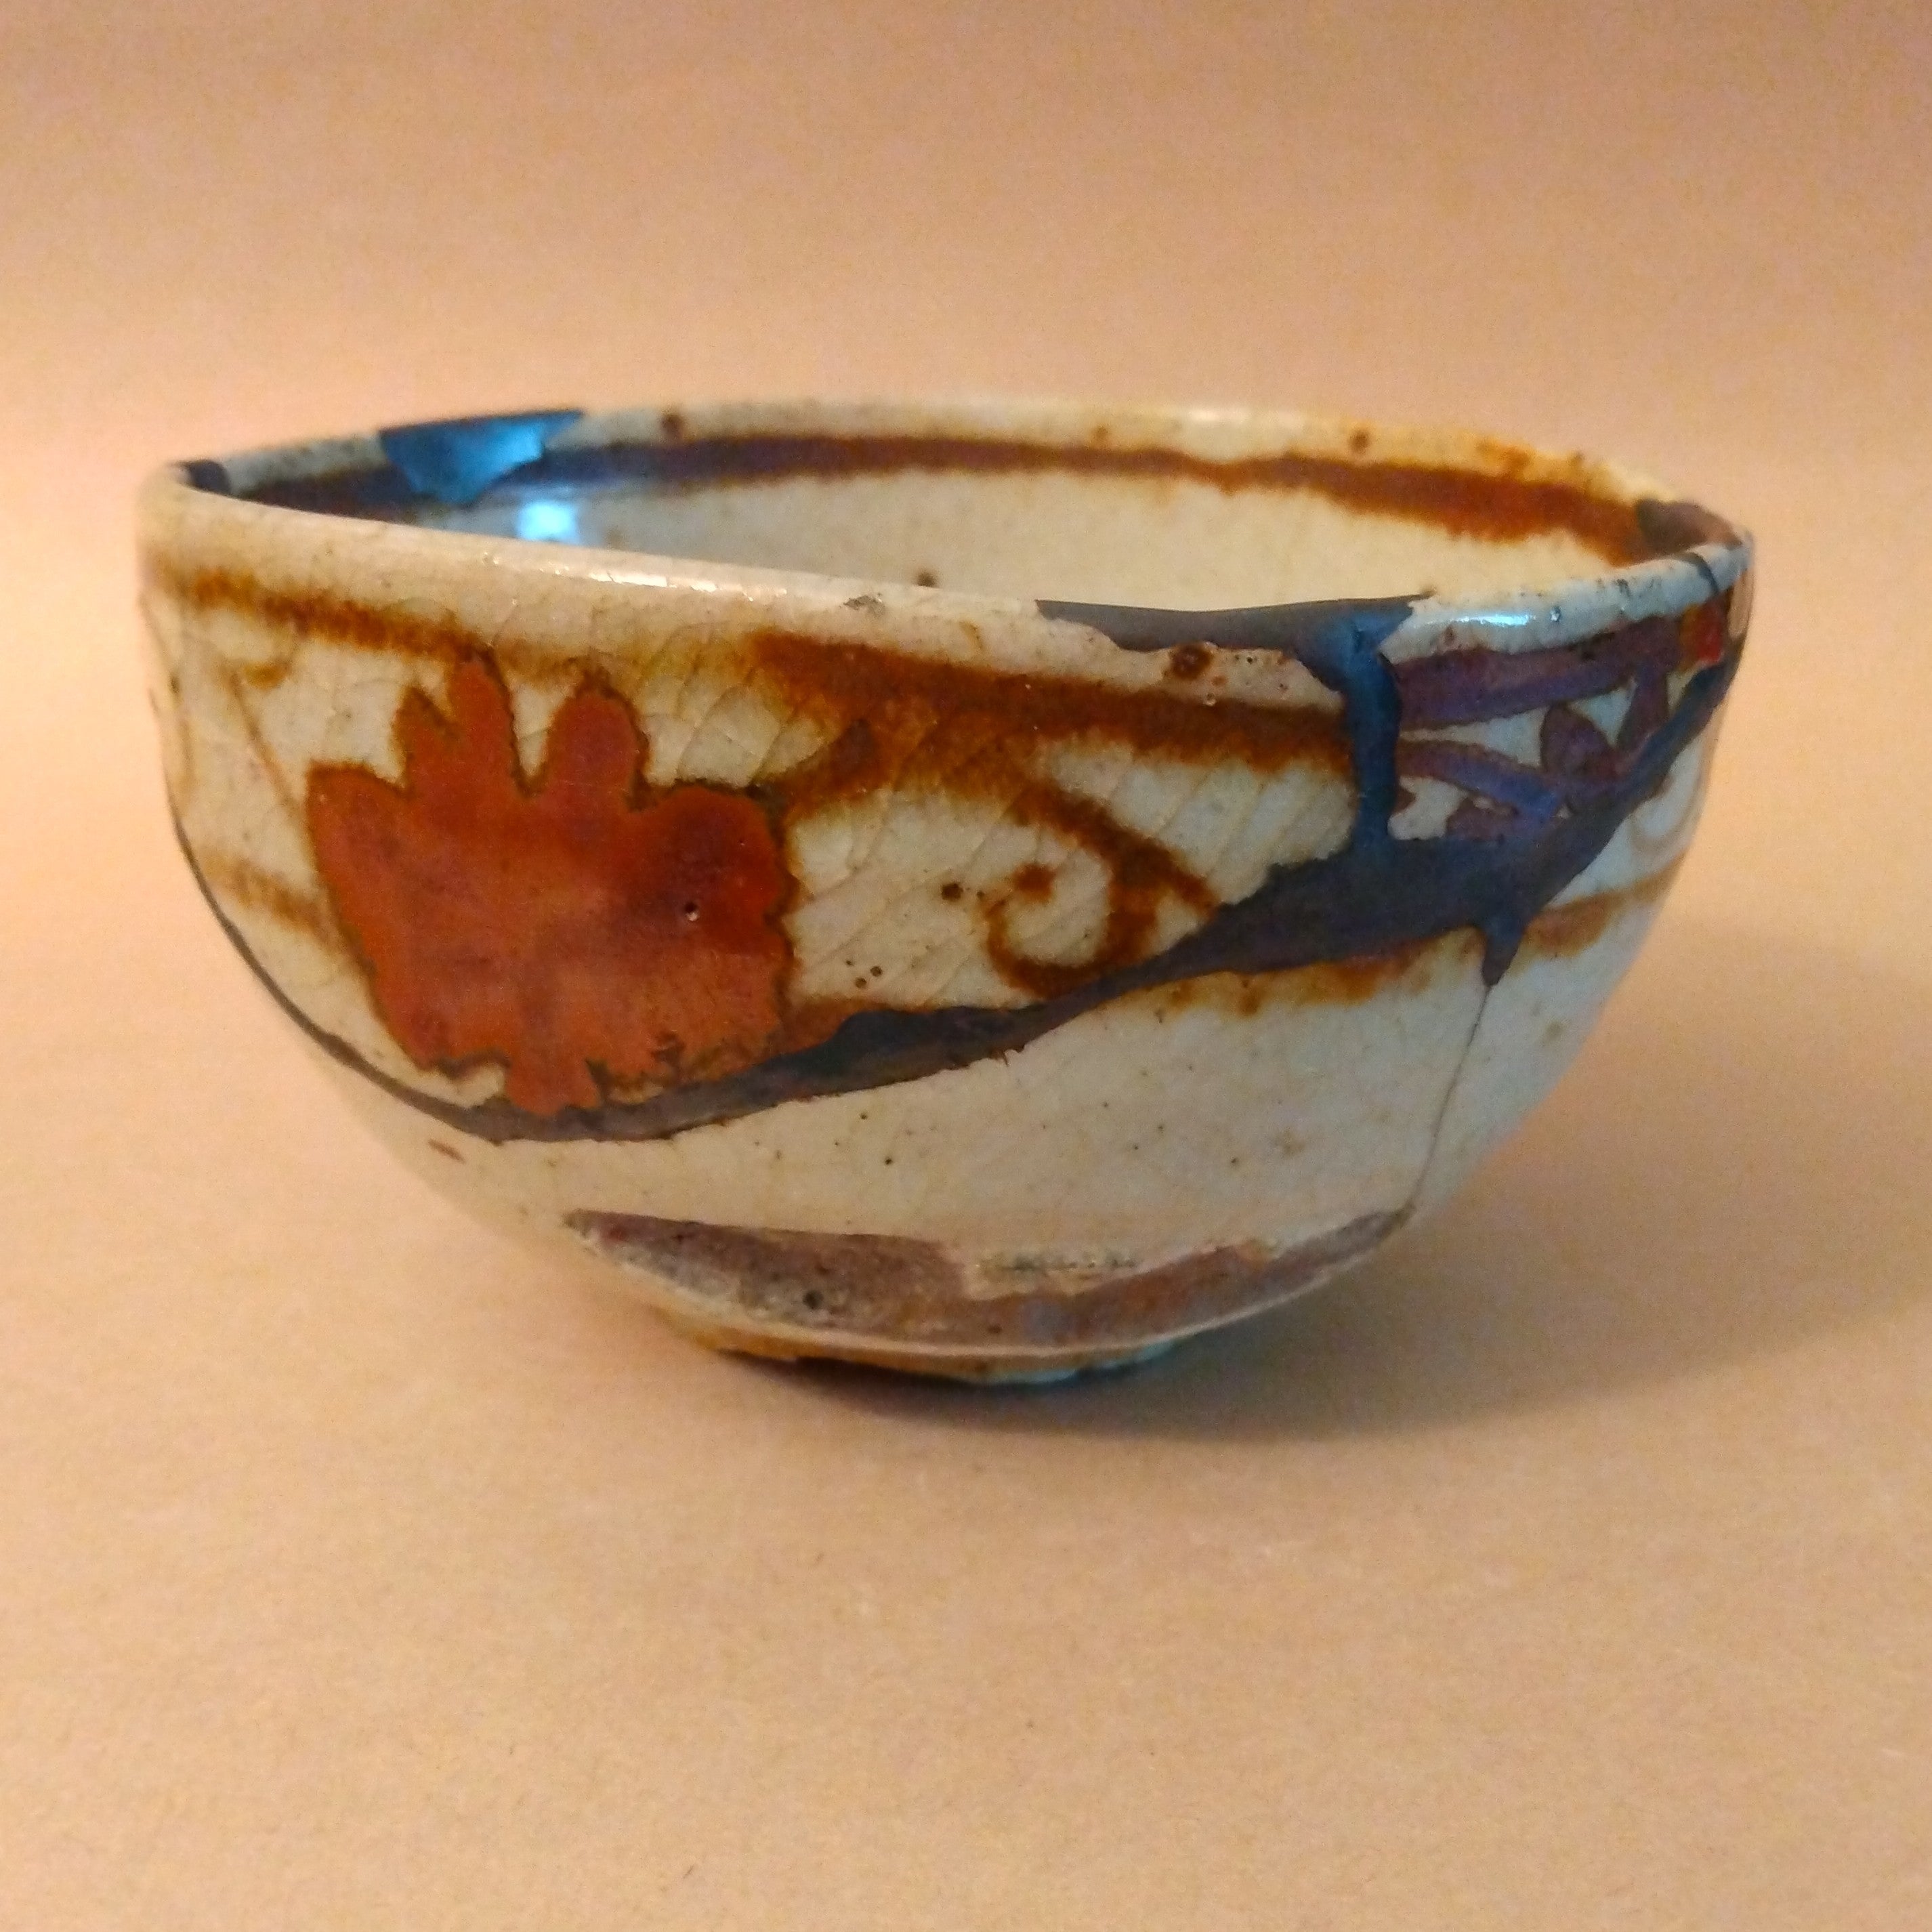 Yabure Chawan (Broken Tea Bowl), Heavily Repaired, Unknown Potter, Vintage; Thiel Collection